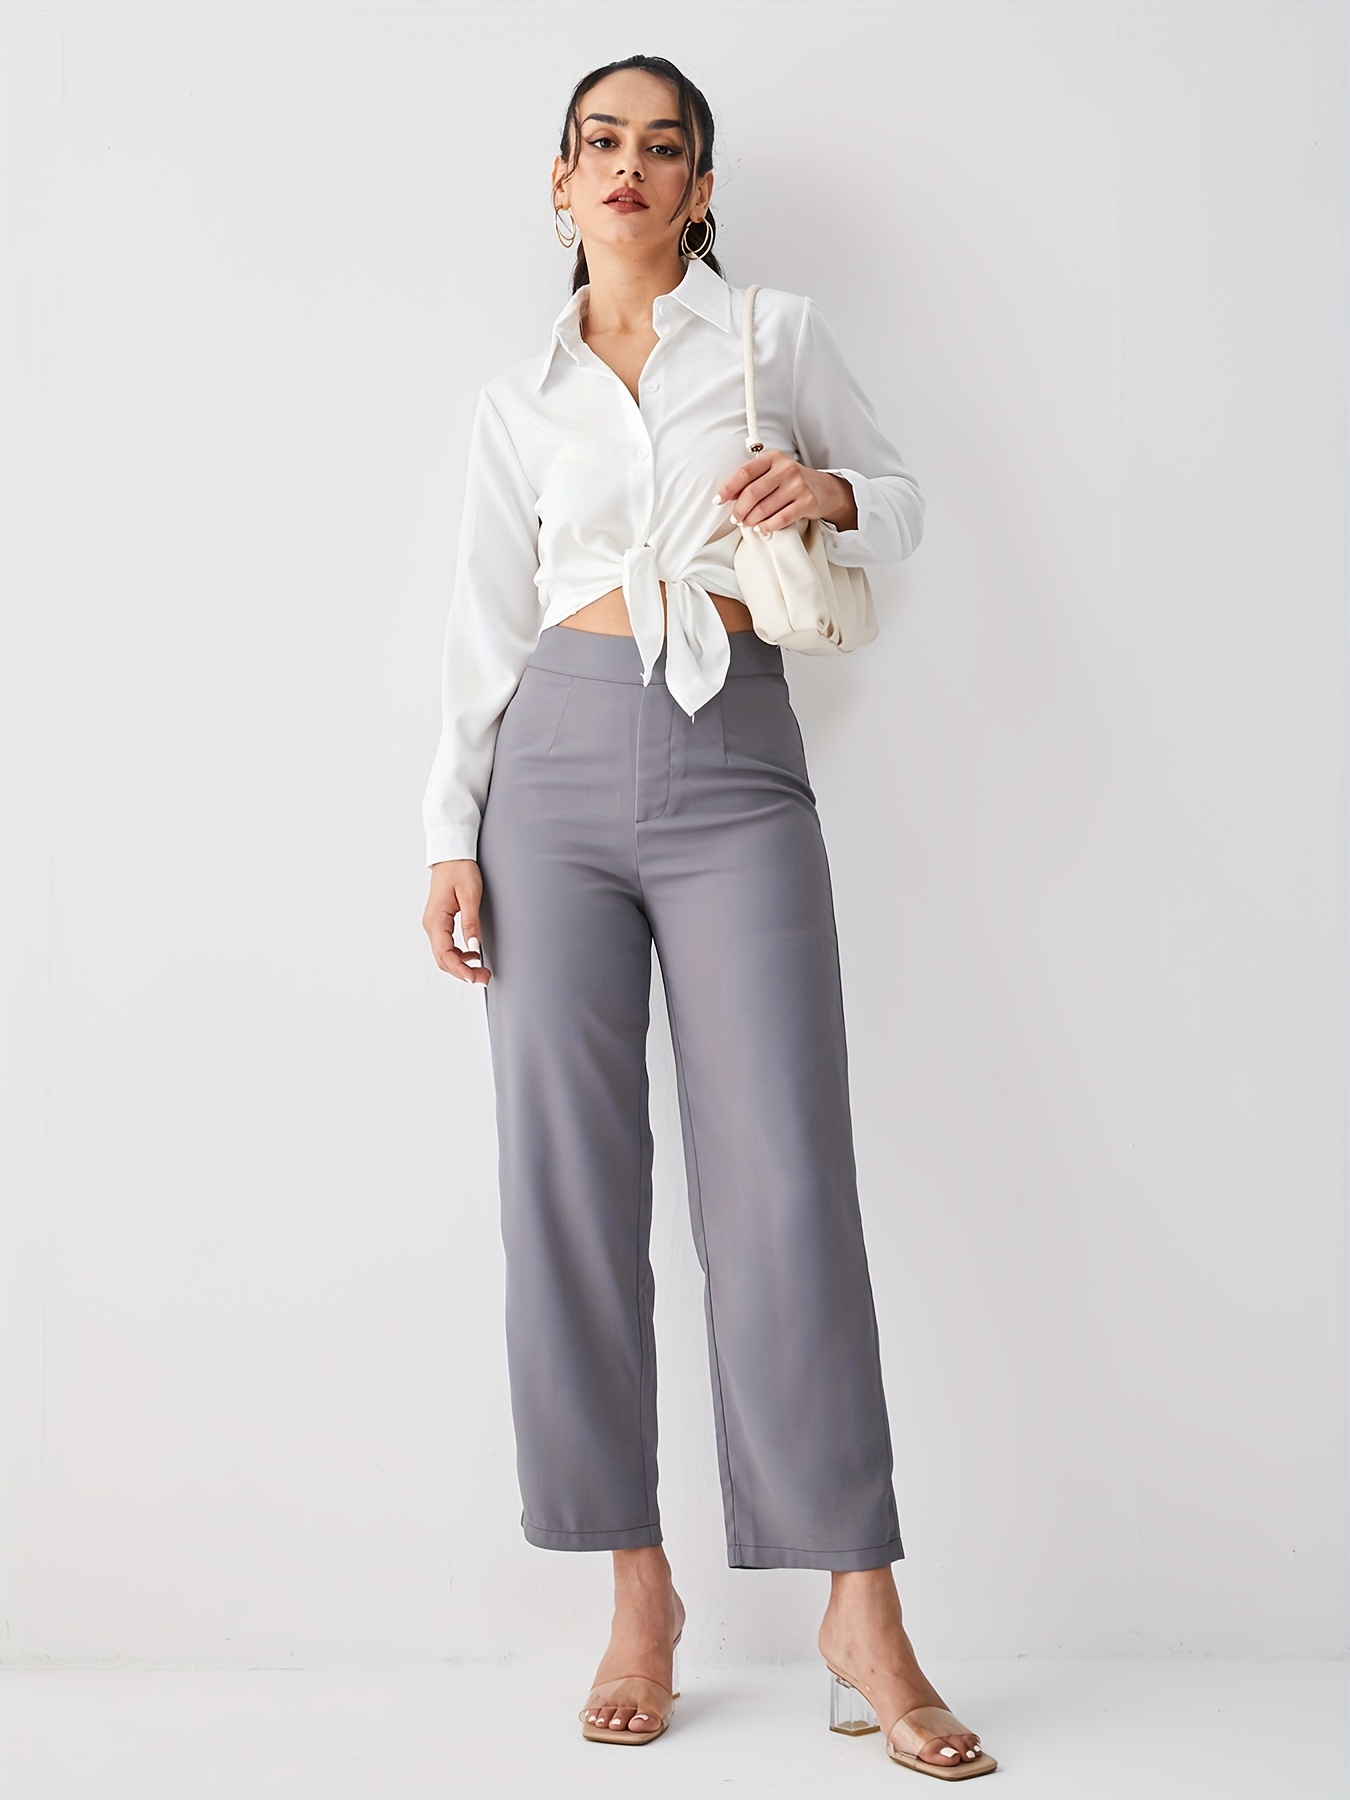 Solid Office Wear TANDUL Women Formal Trousers at Rs 265/piece in